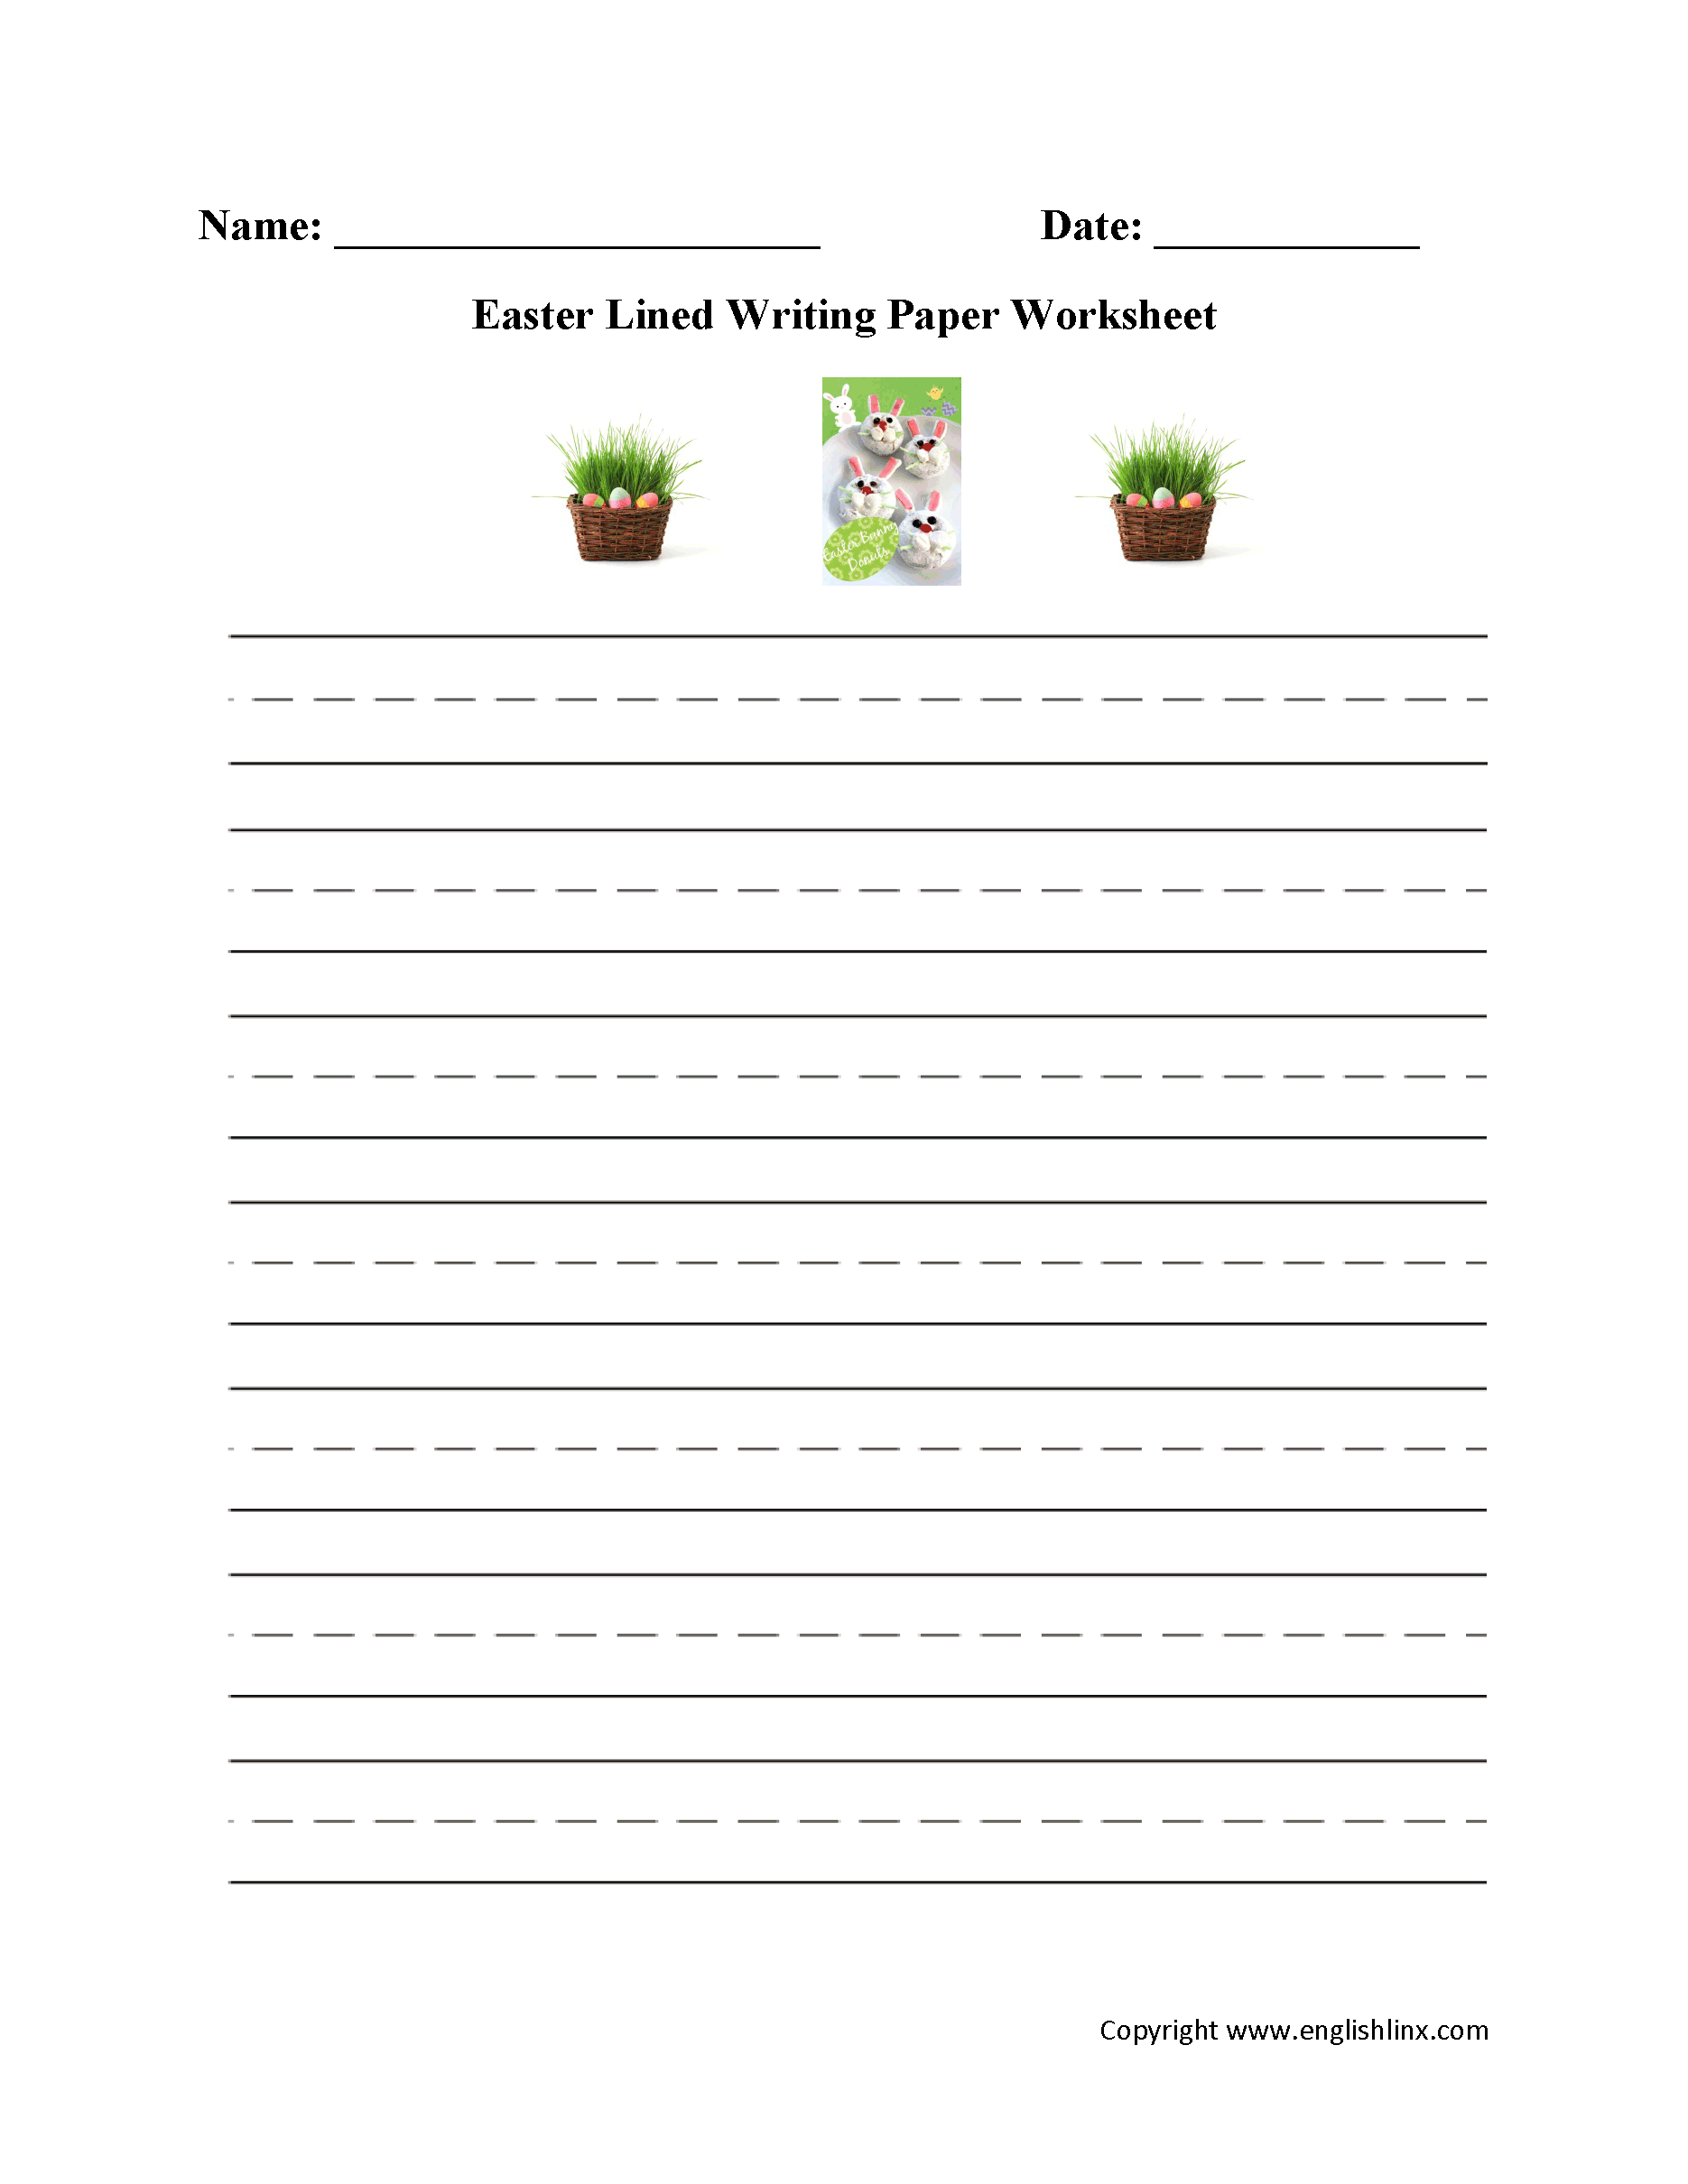 Easter Lined Writing Paper Worksheet